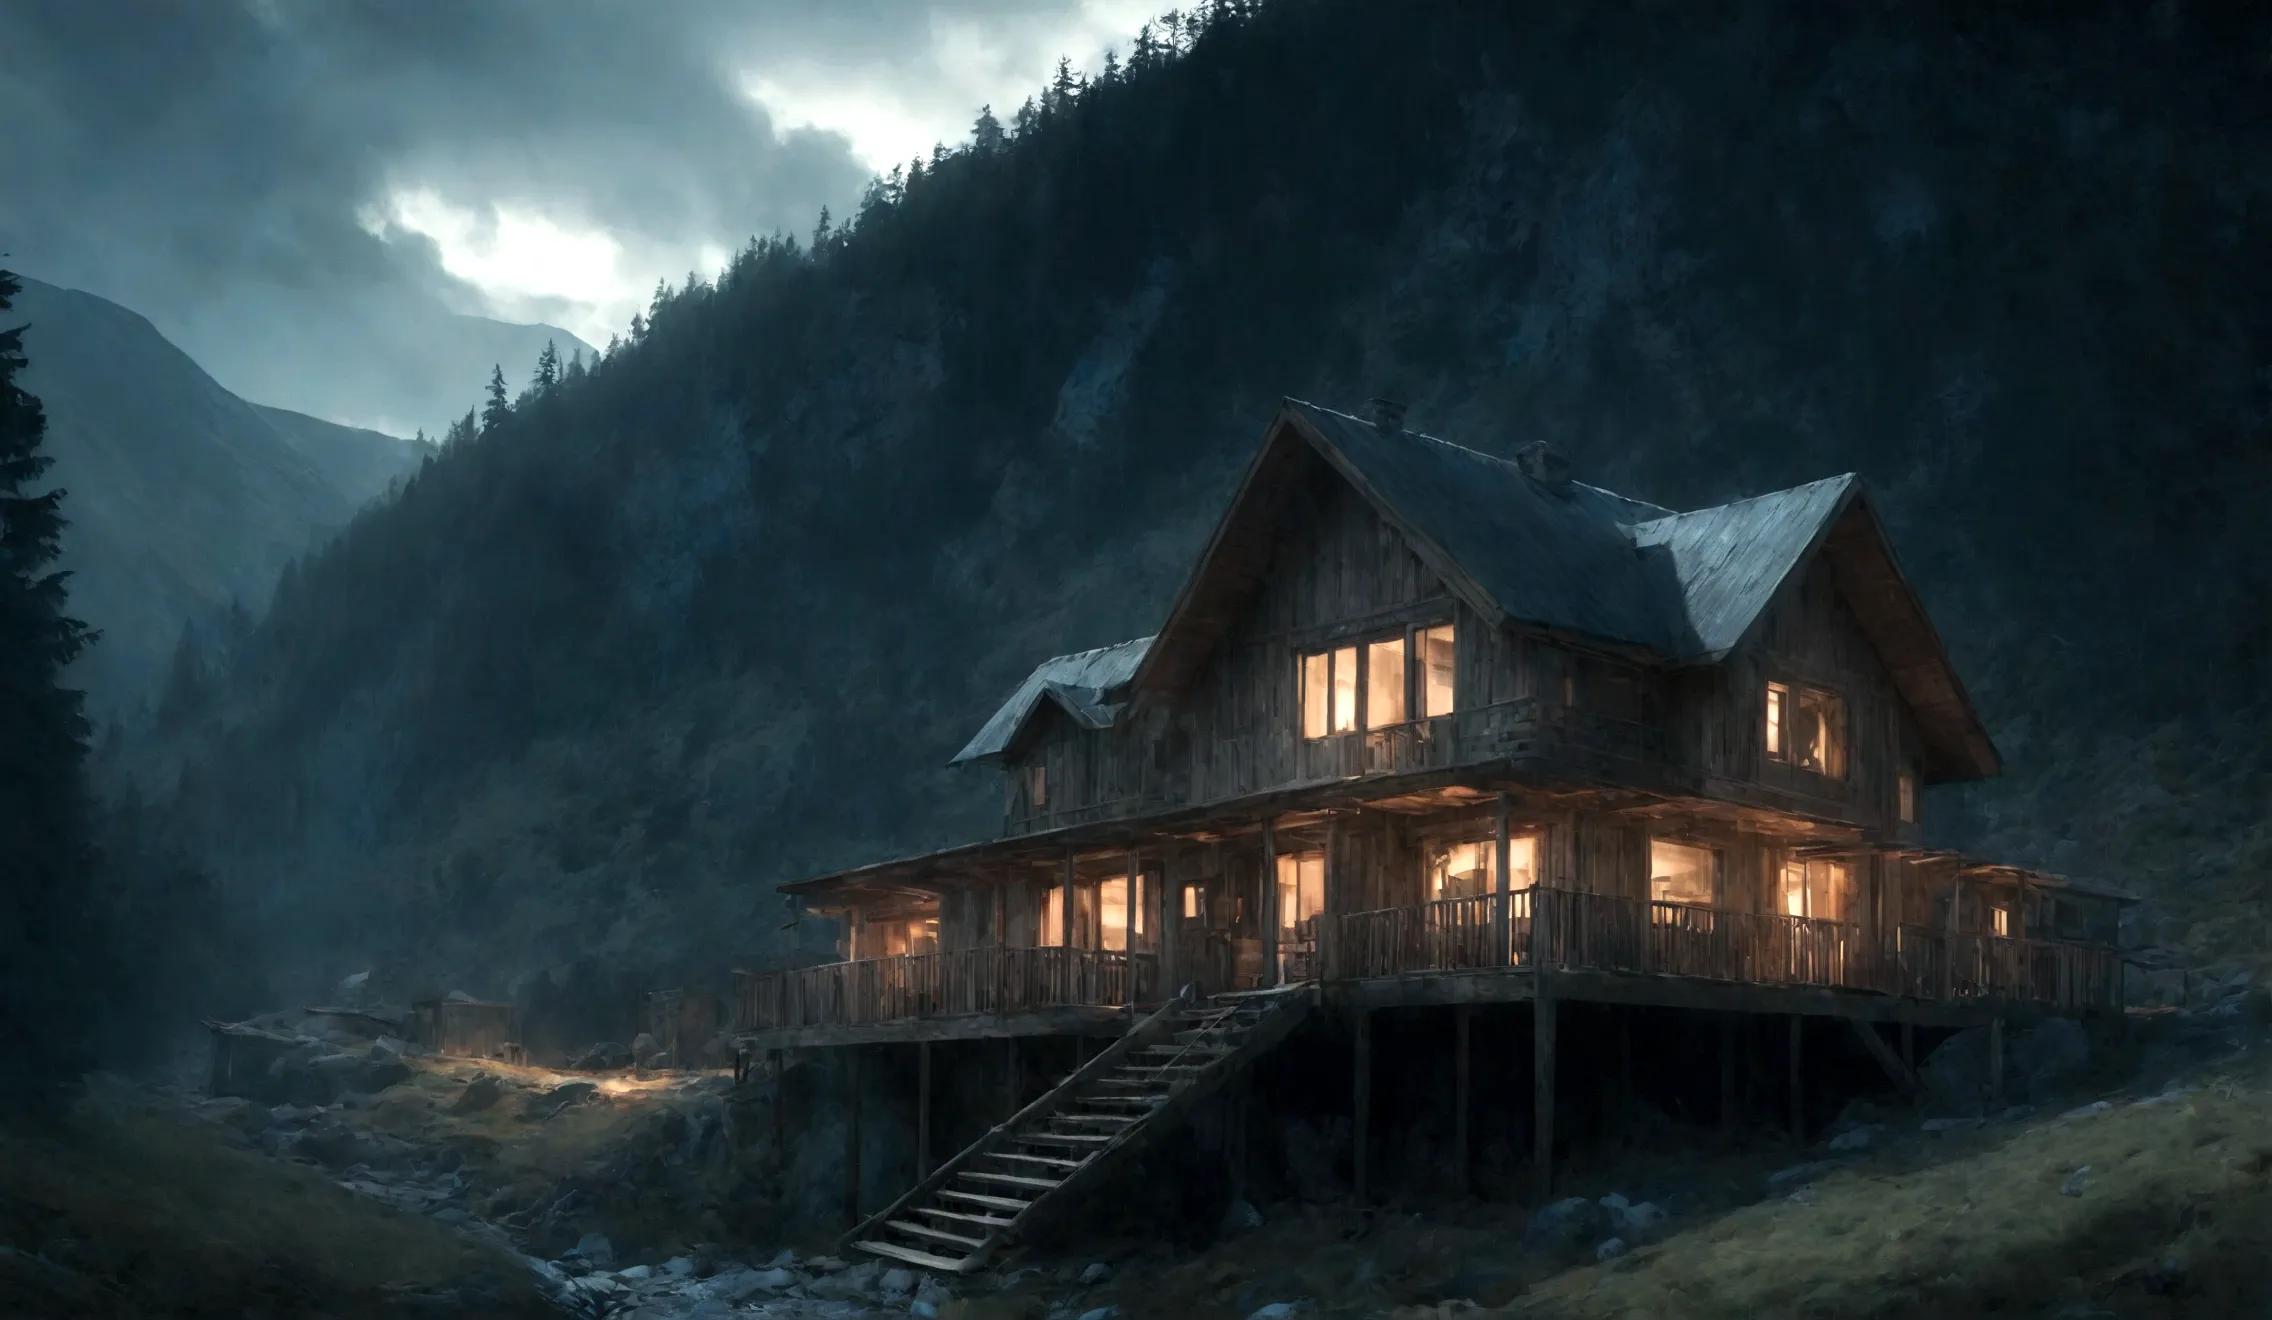 An wooden house in a eeire montain with dark woods